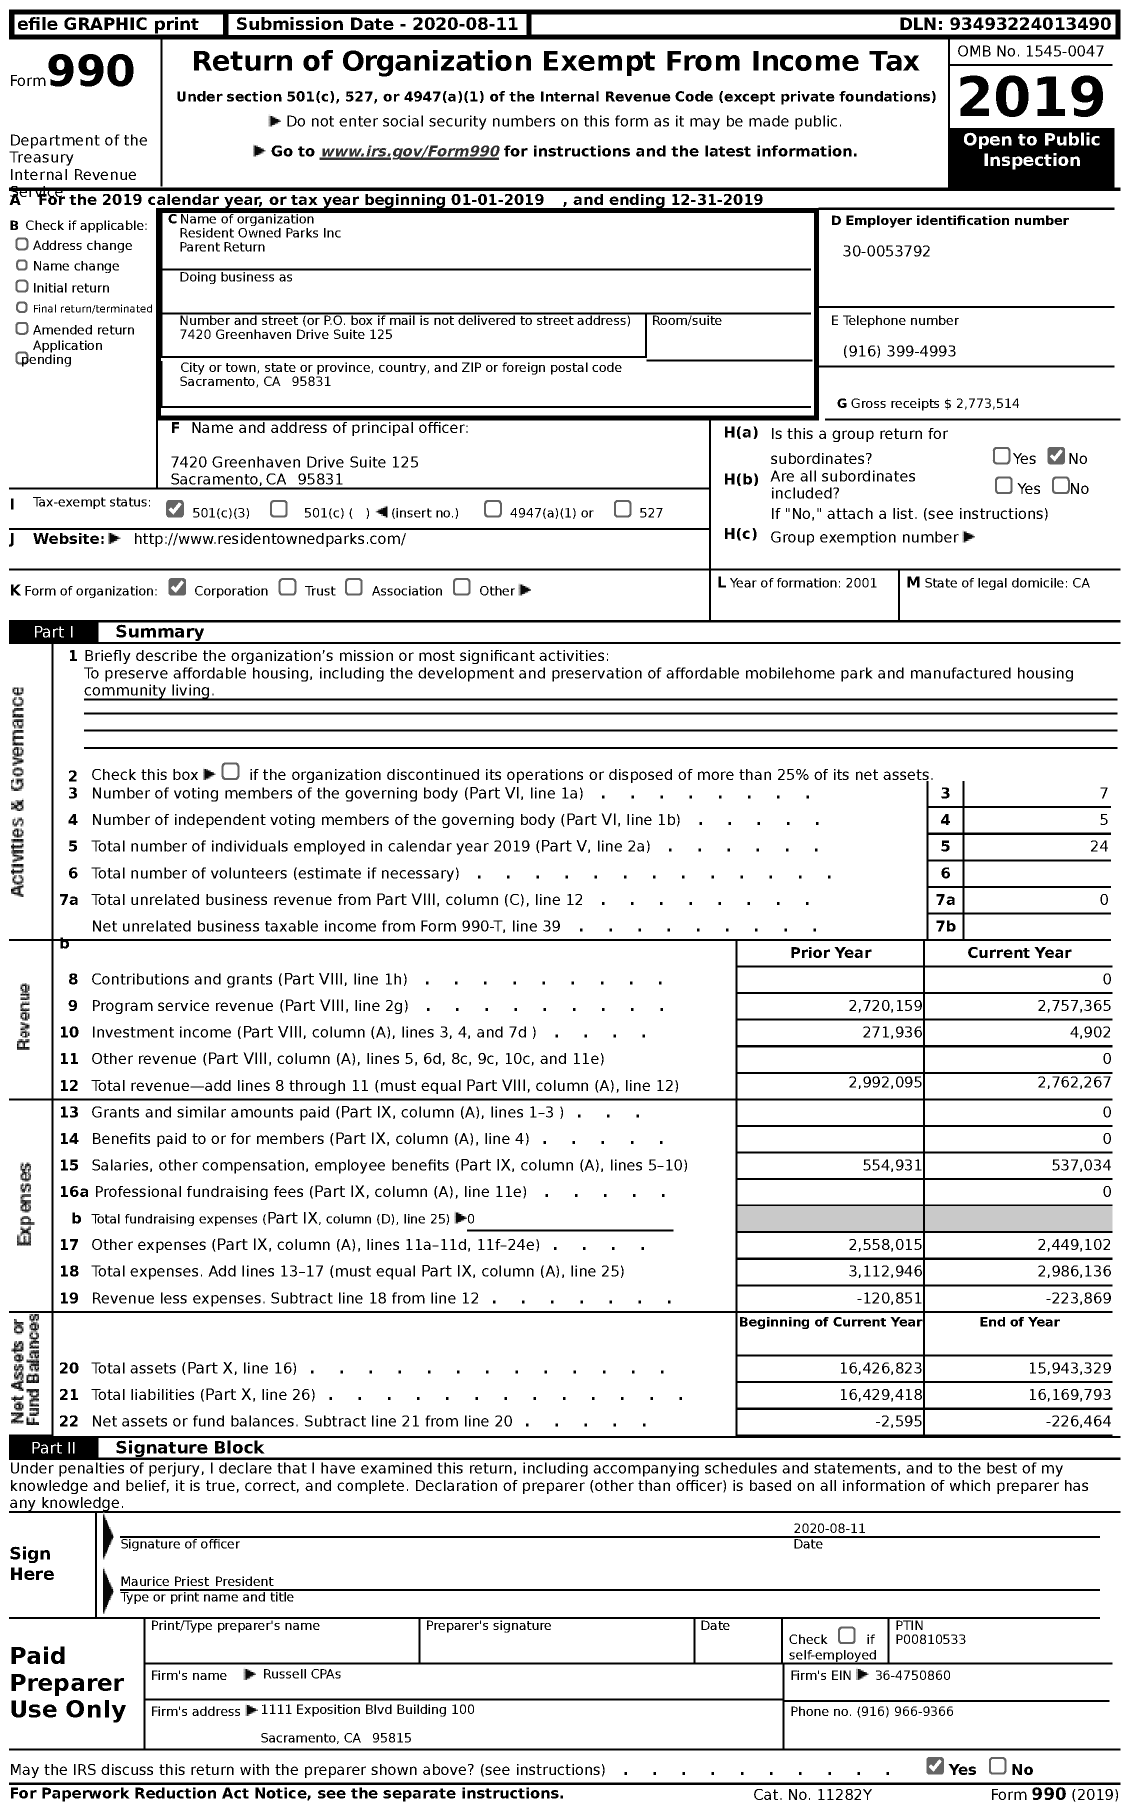 Image of first page of 2019 Form 990 for Resident Owned Parks Inc Parent Return (ROP)